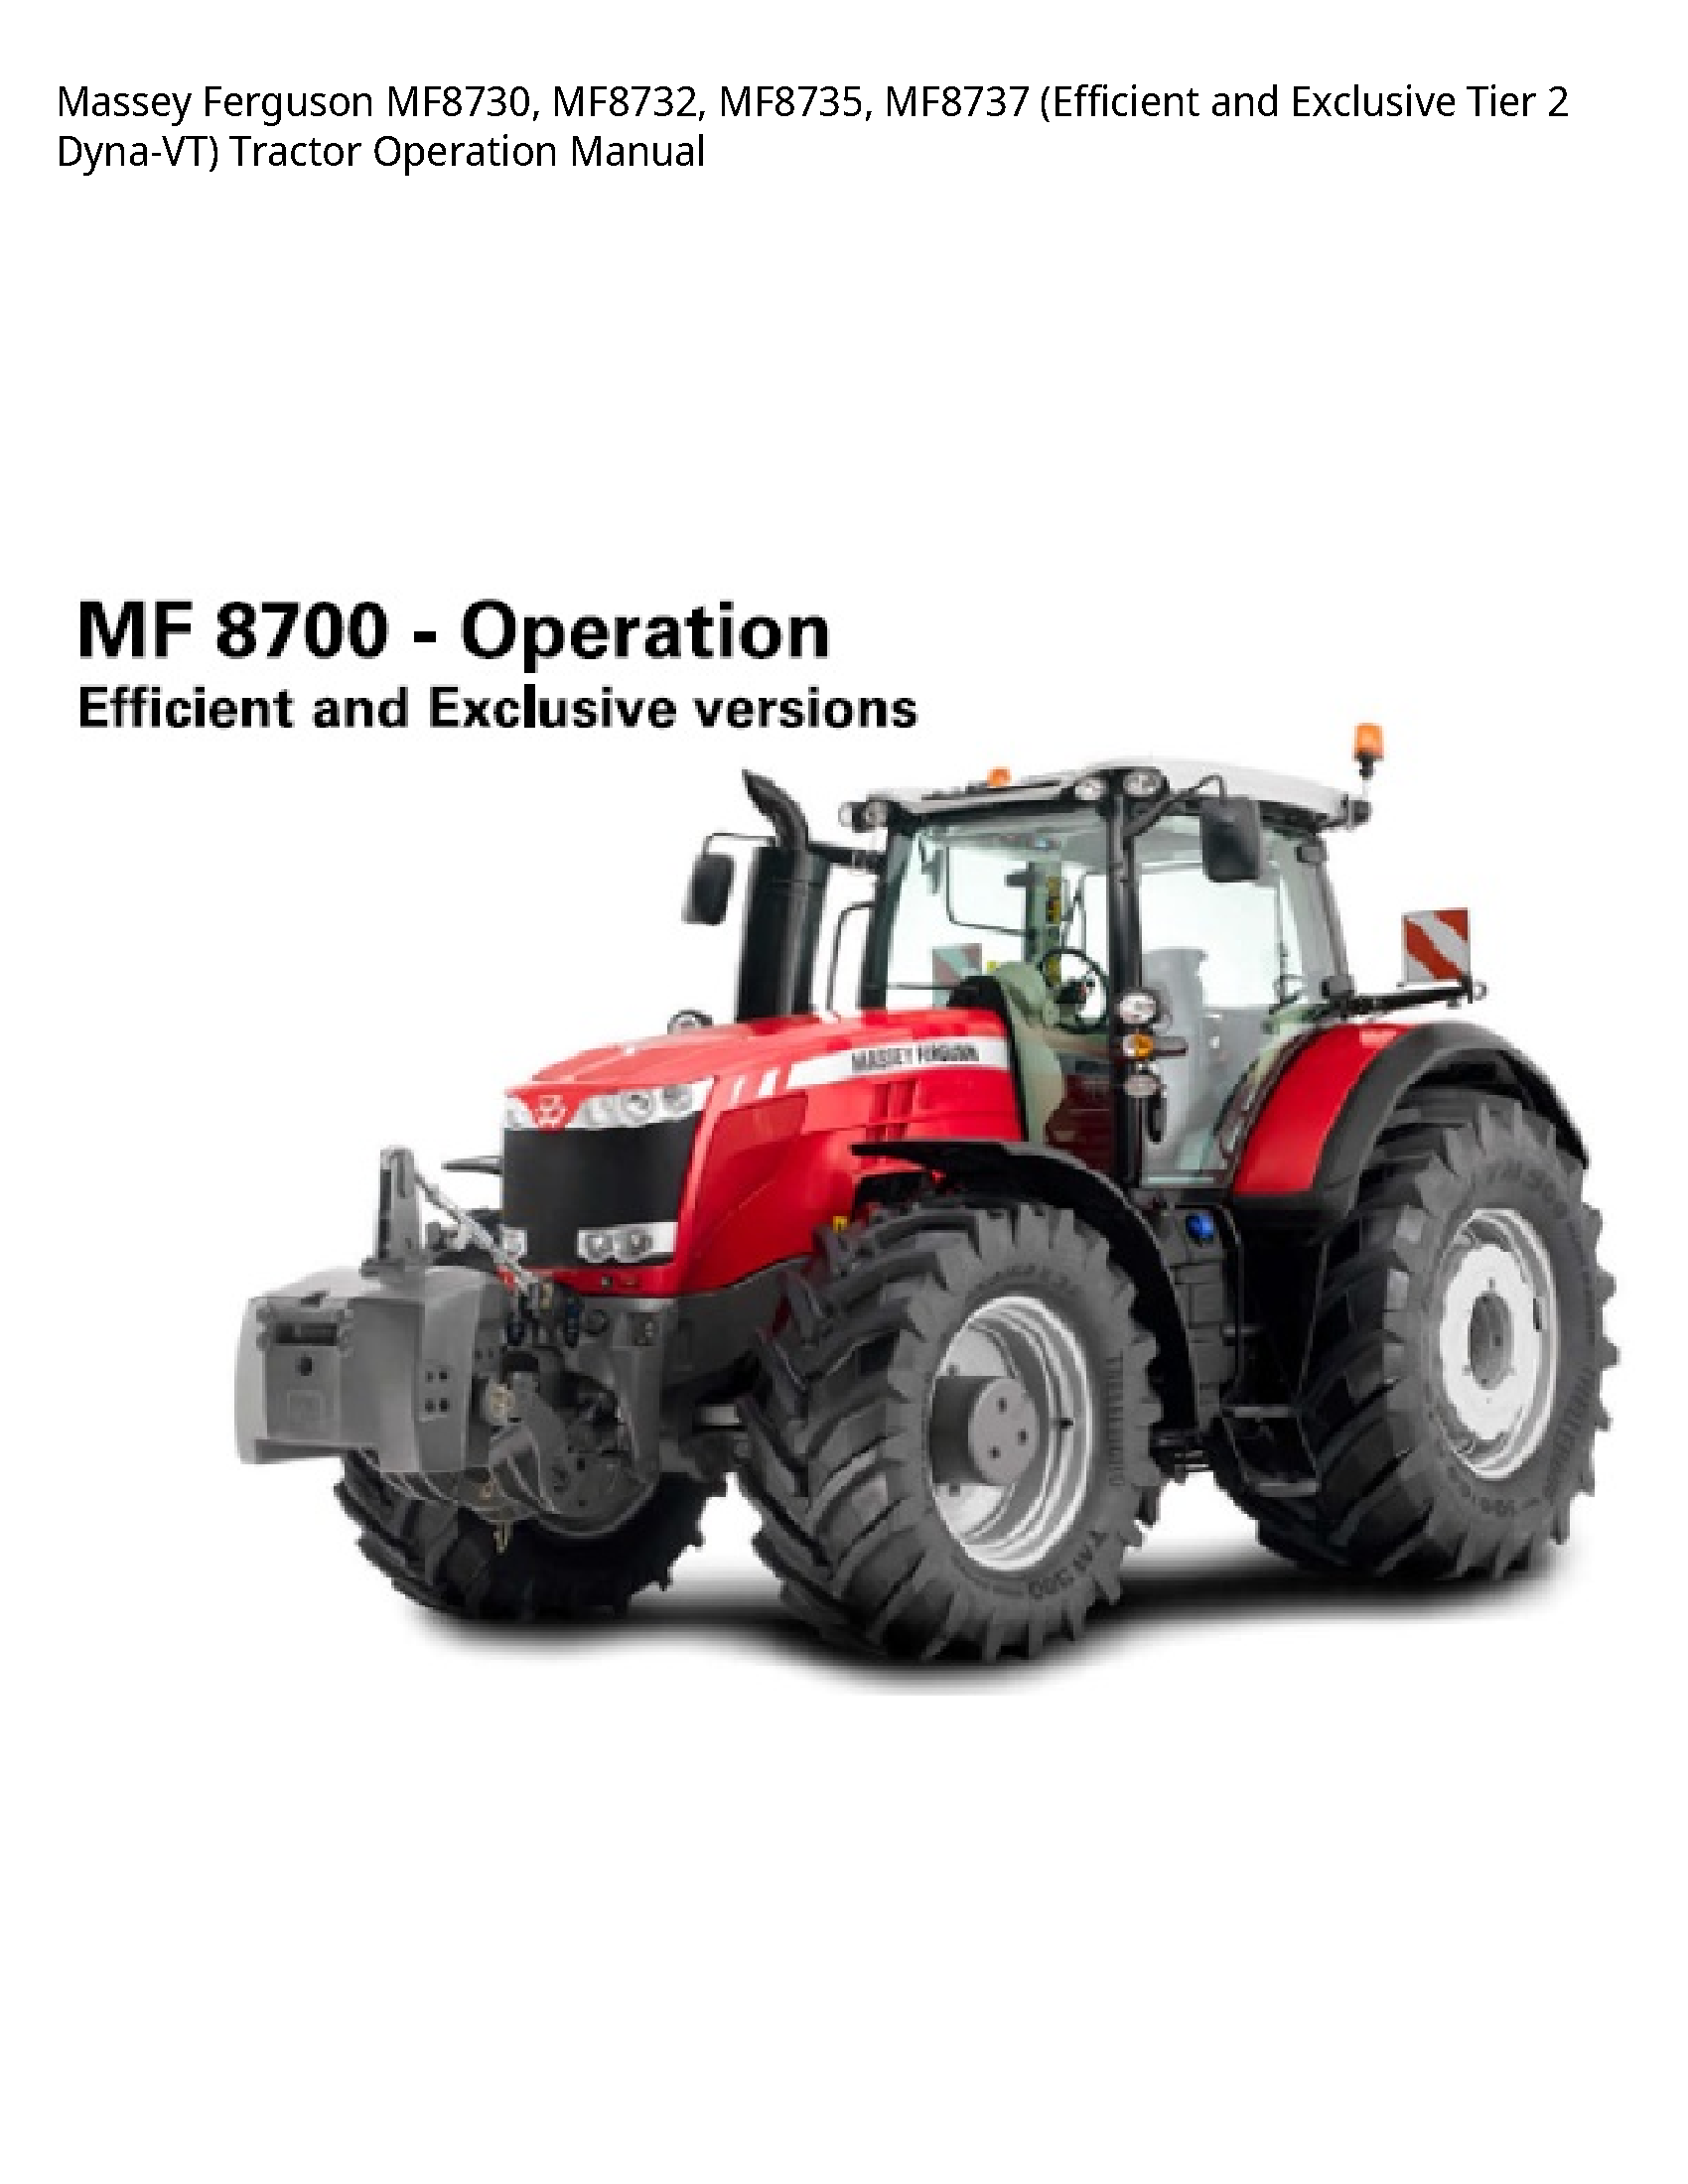 Massey Ferguson MF8730 (Efficient  Exclusive Tier Dyna-VT) Tractor Operation manual